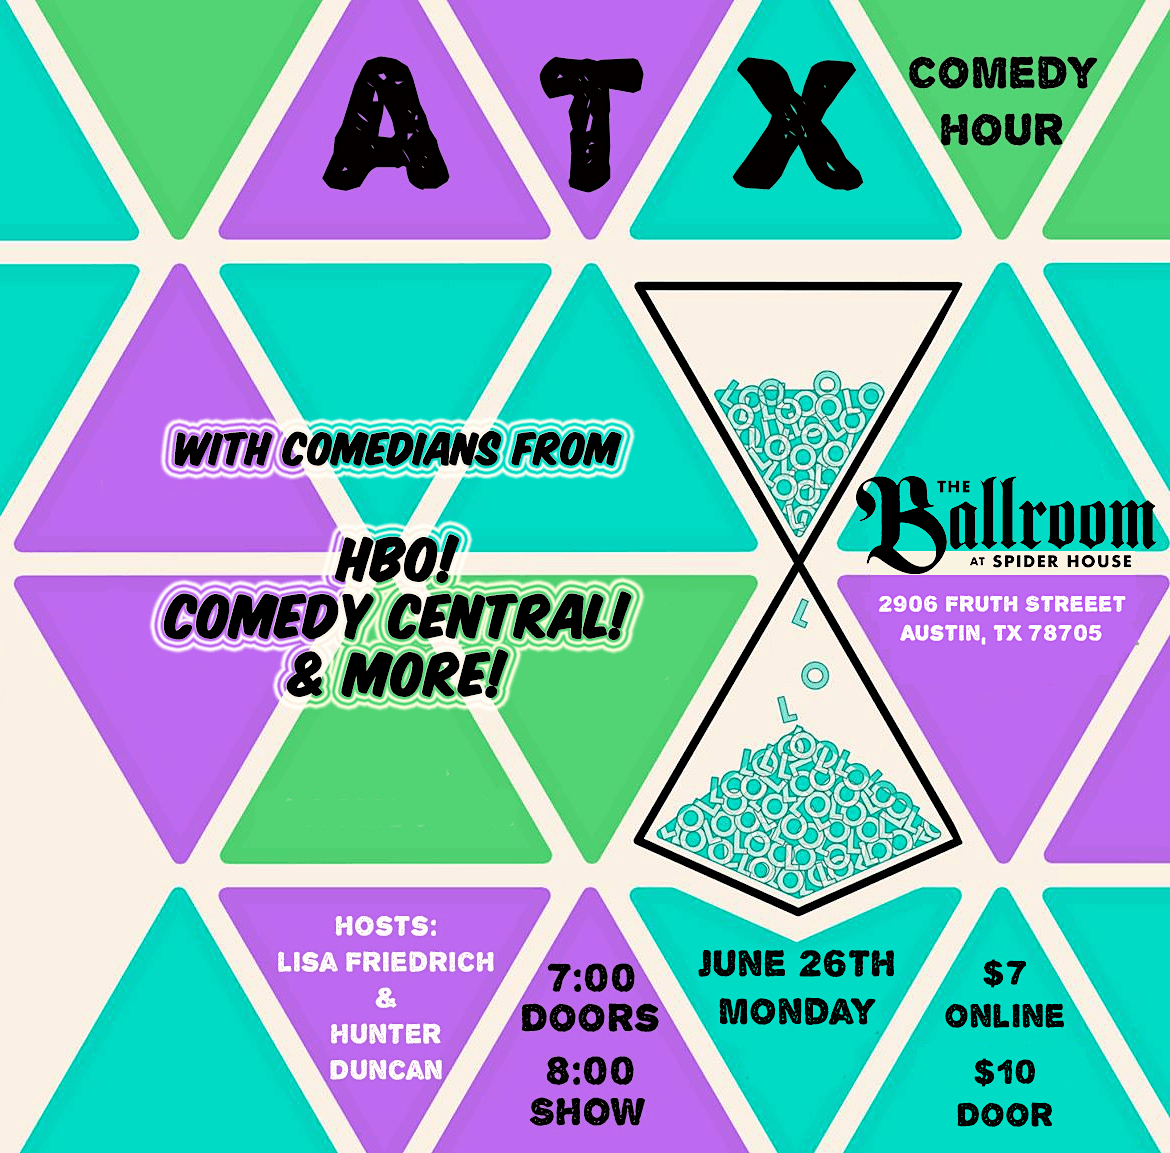 ATX Comedy Hour: MAY DAY!